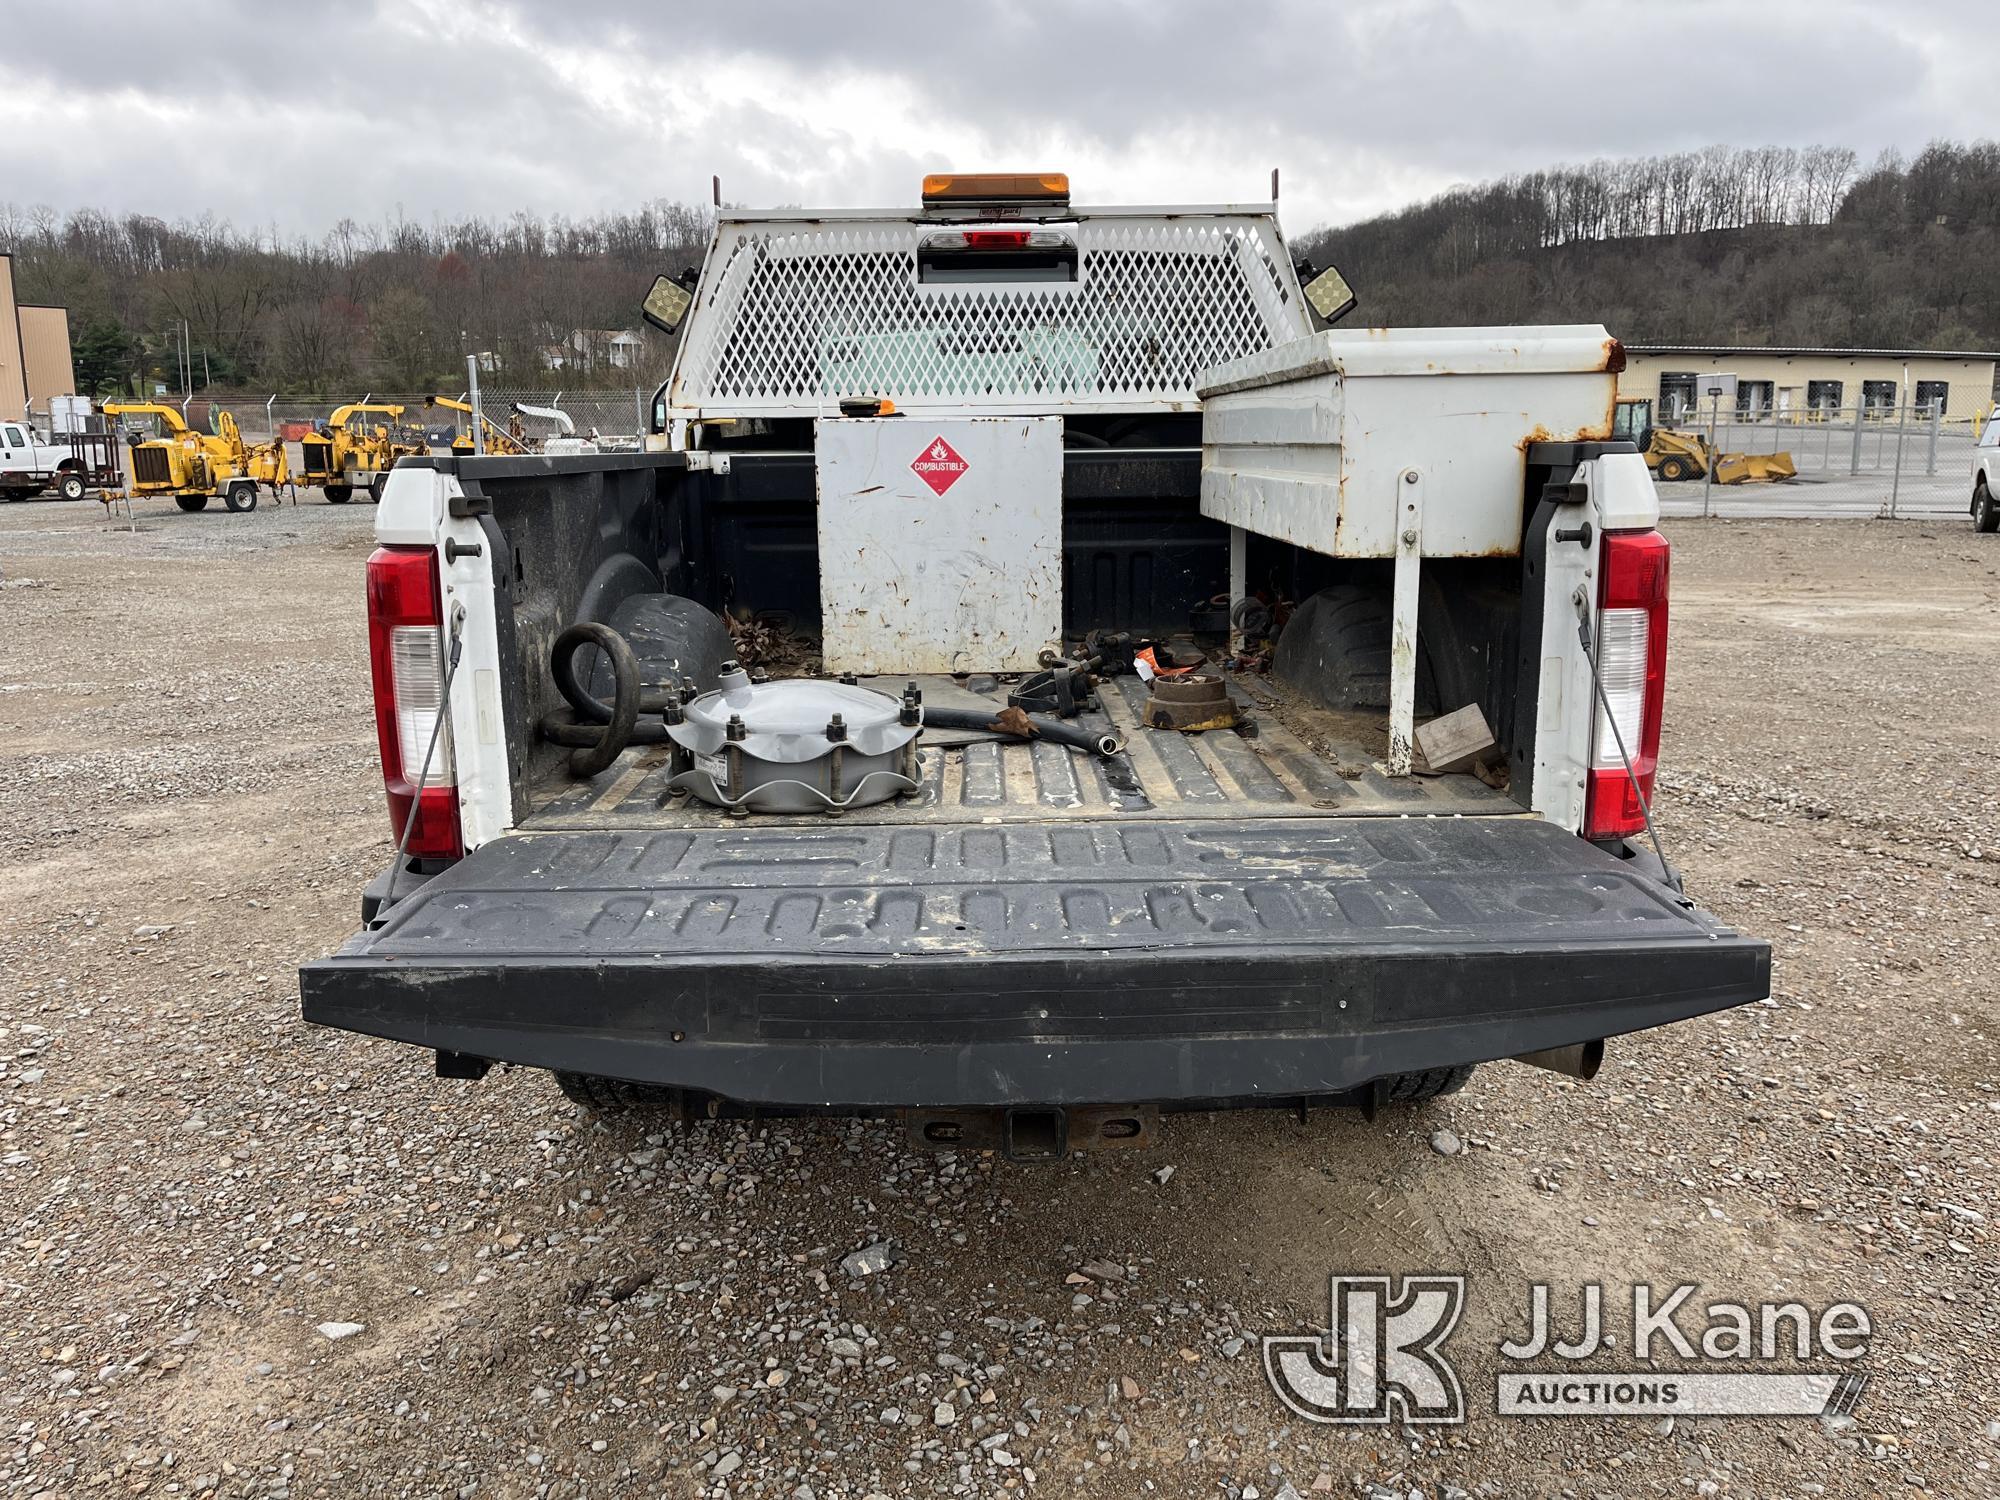 (Smock, PA) 2017 Ford F250 4x4 Extended-Cab Pickup Truck Runs & Moves, Rust & Body Damage